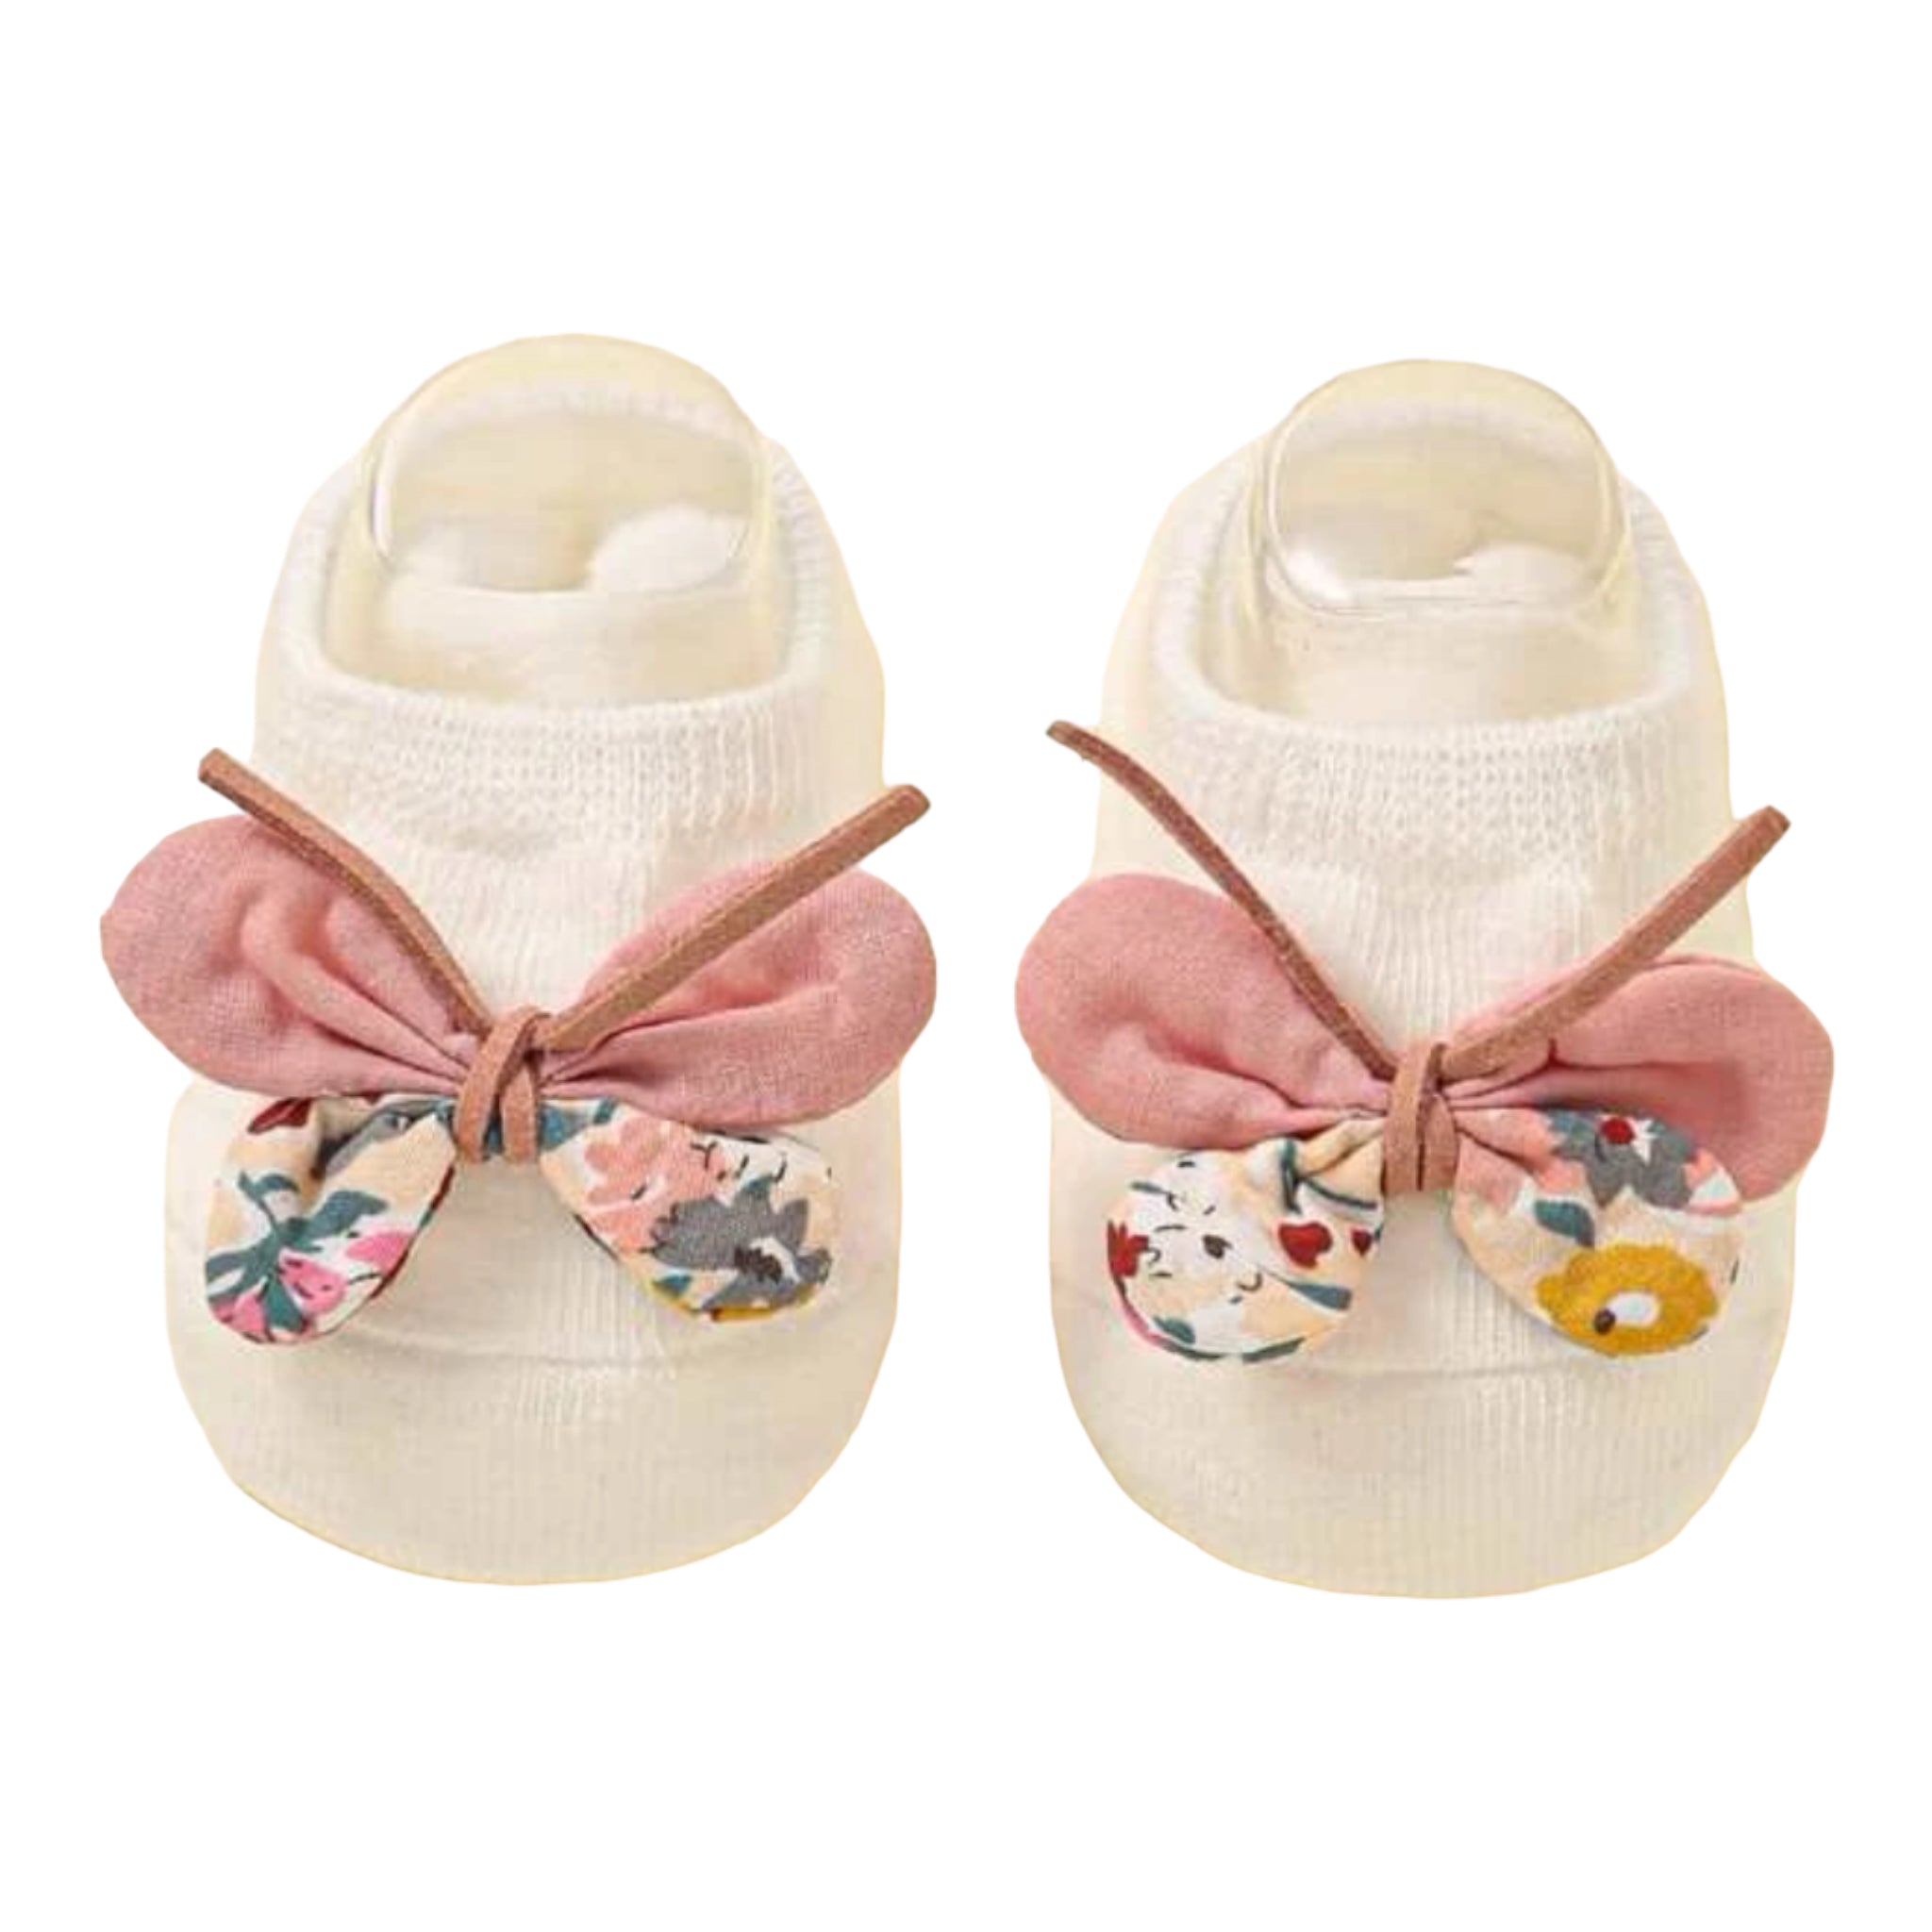 Baby newborn Bow Socks | Floral, shop the best Christmas gift gifts for her for him from Inna carton online store dubai, UAE!